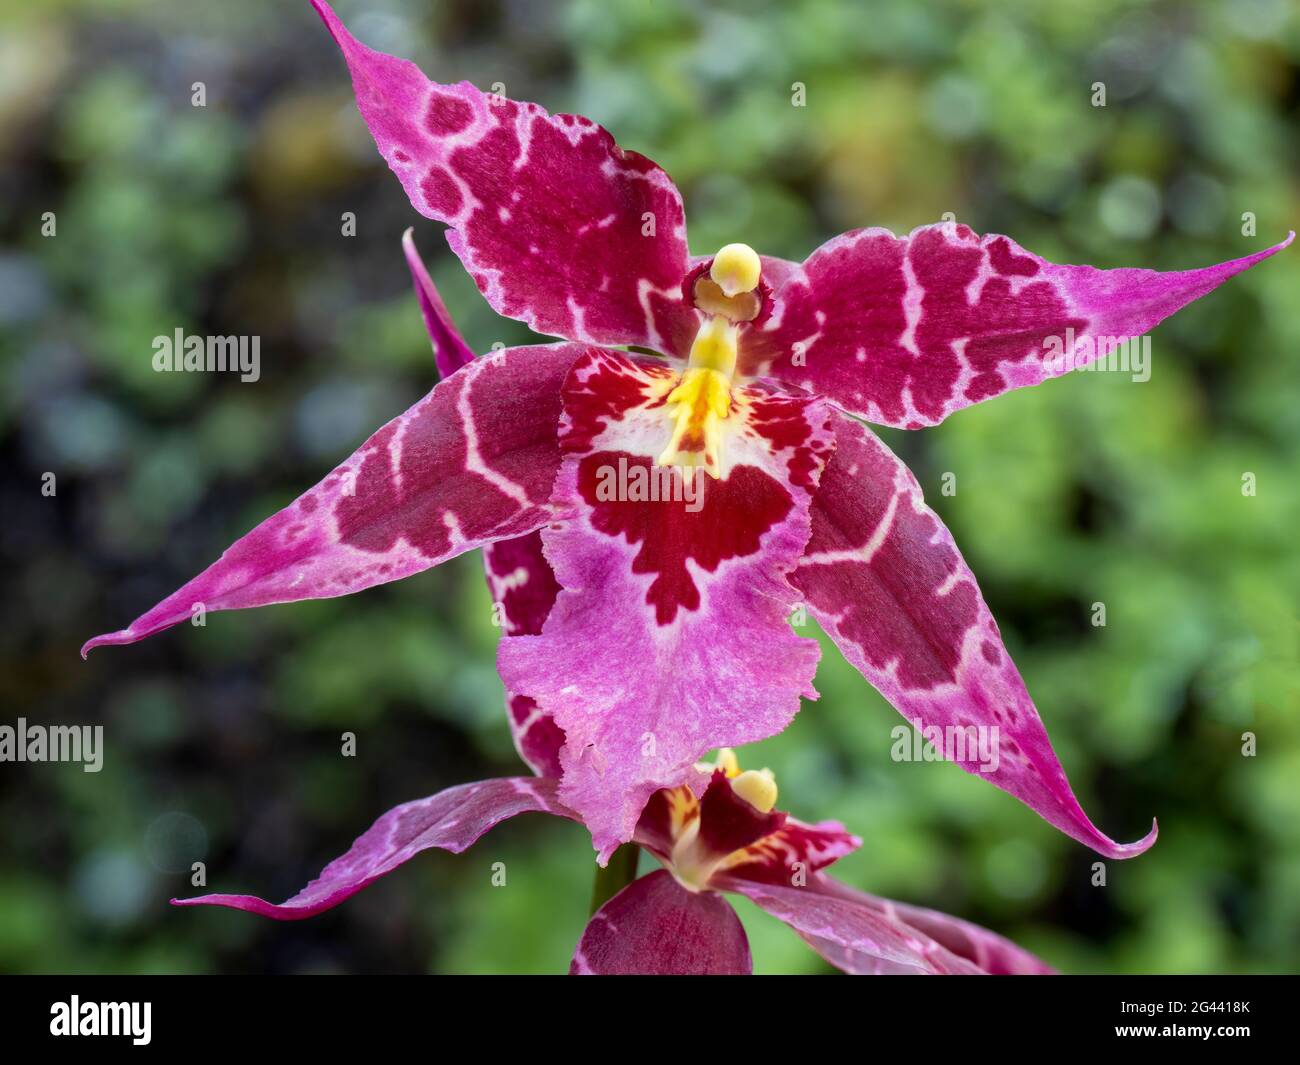 Close-up of pink orchid Stock Photo